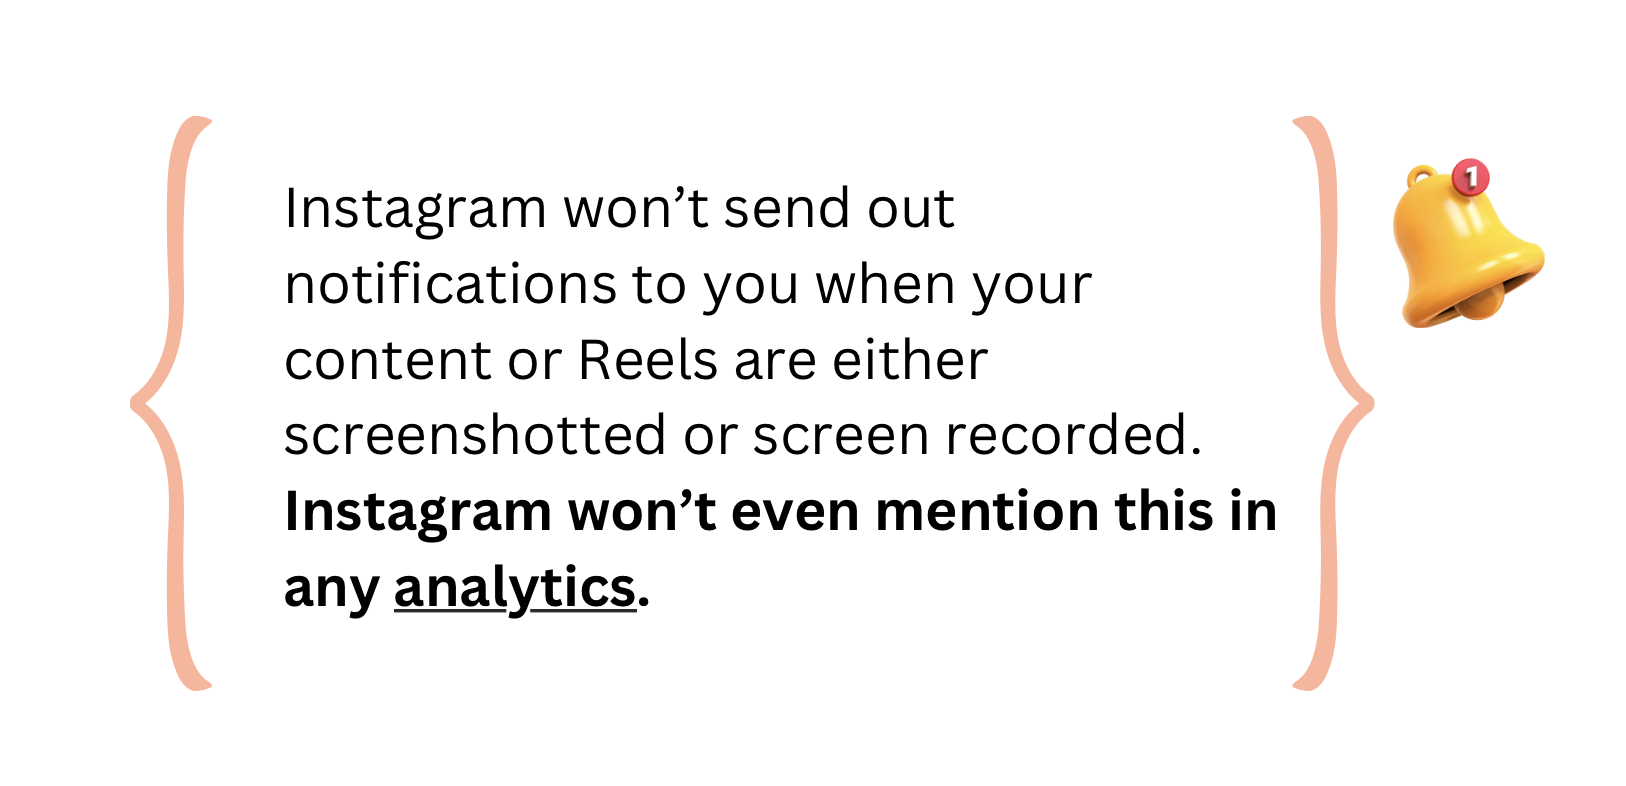 Does Instagram Notify Users About Screenshots